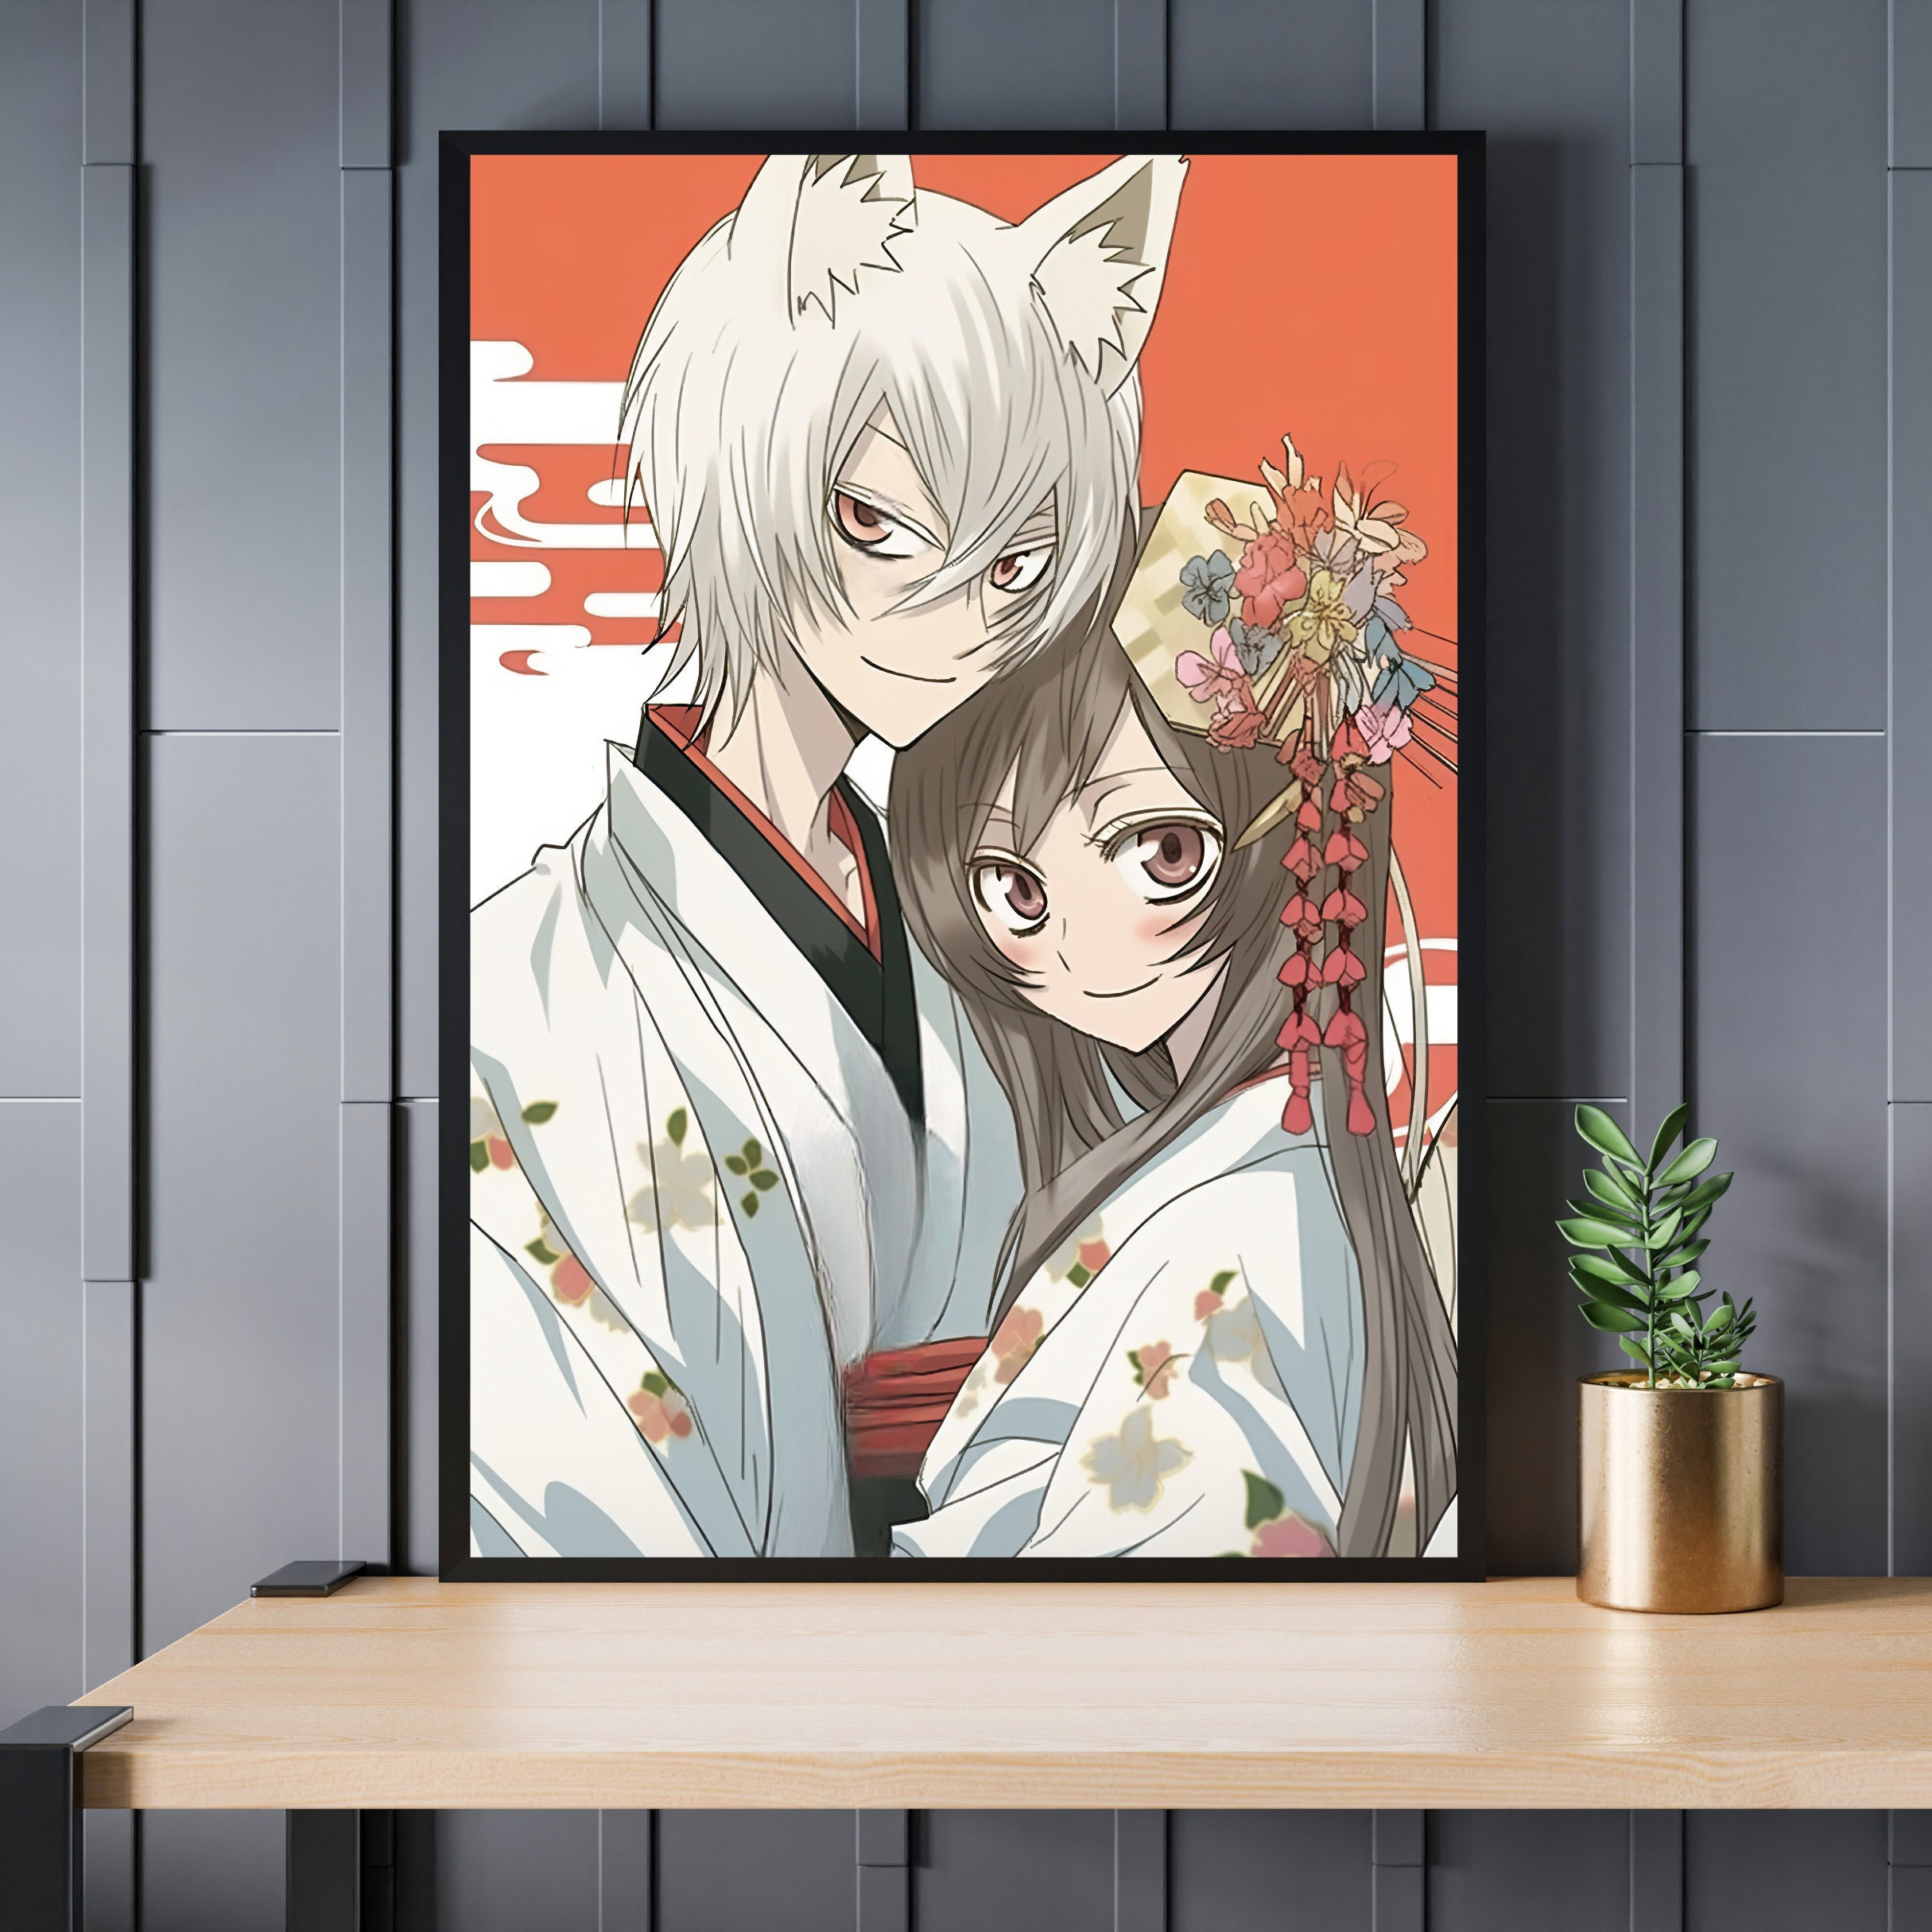 Tomoe Kamisama Kiss, an art print by theCecile - INPRNT